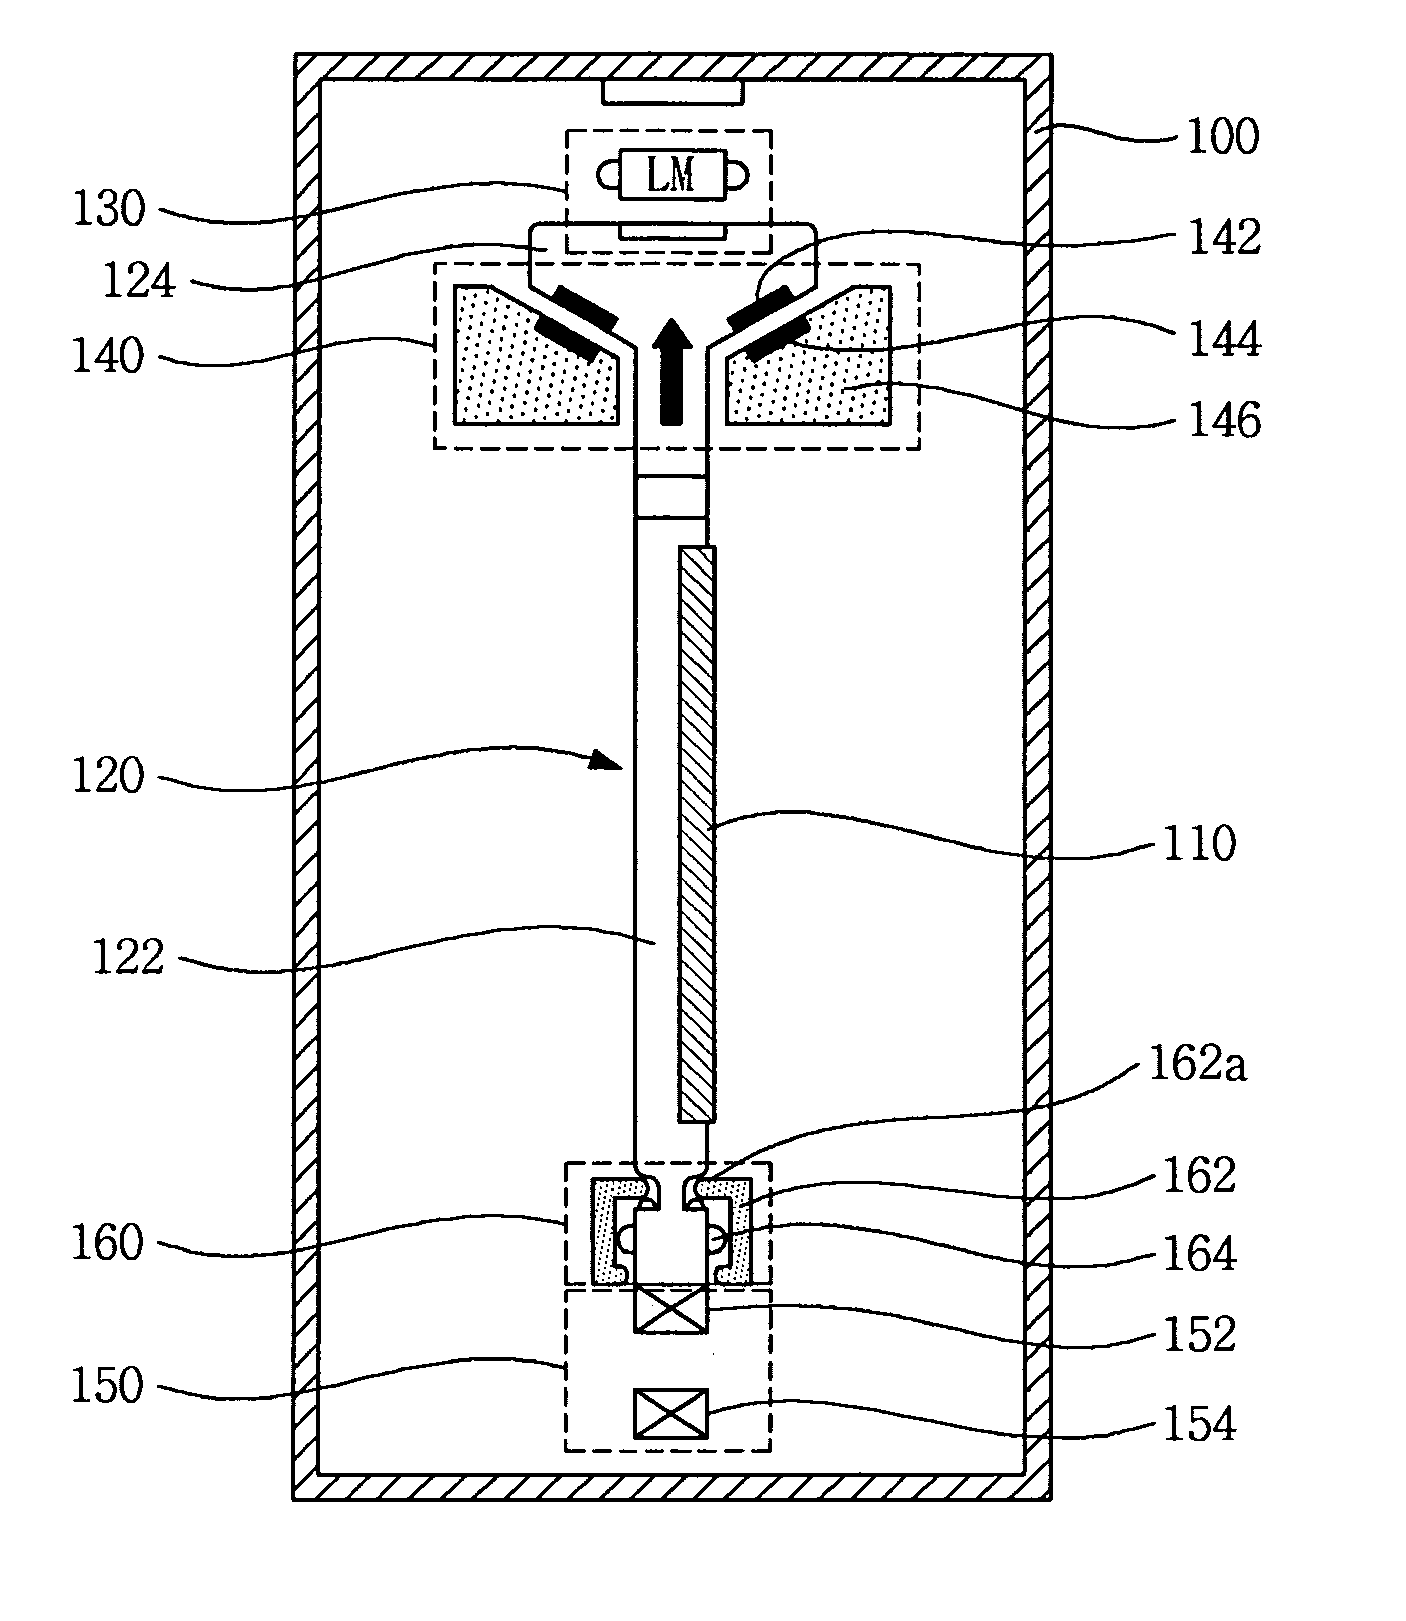 Apparatus for transferring substrates